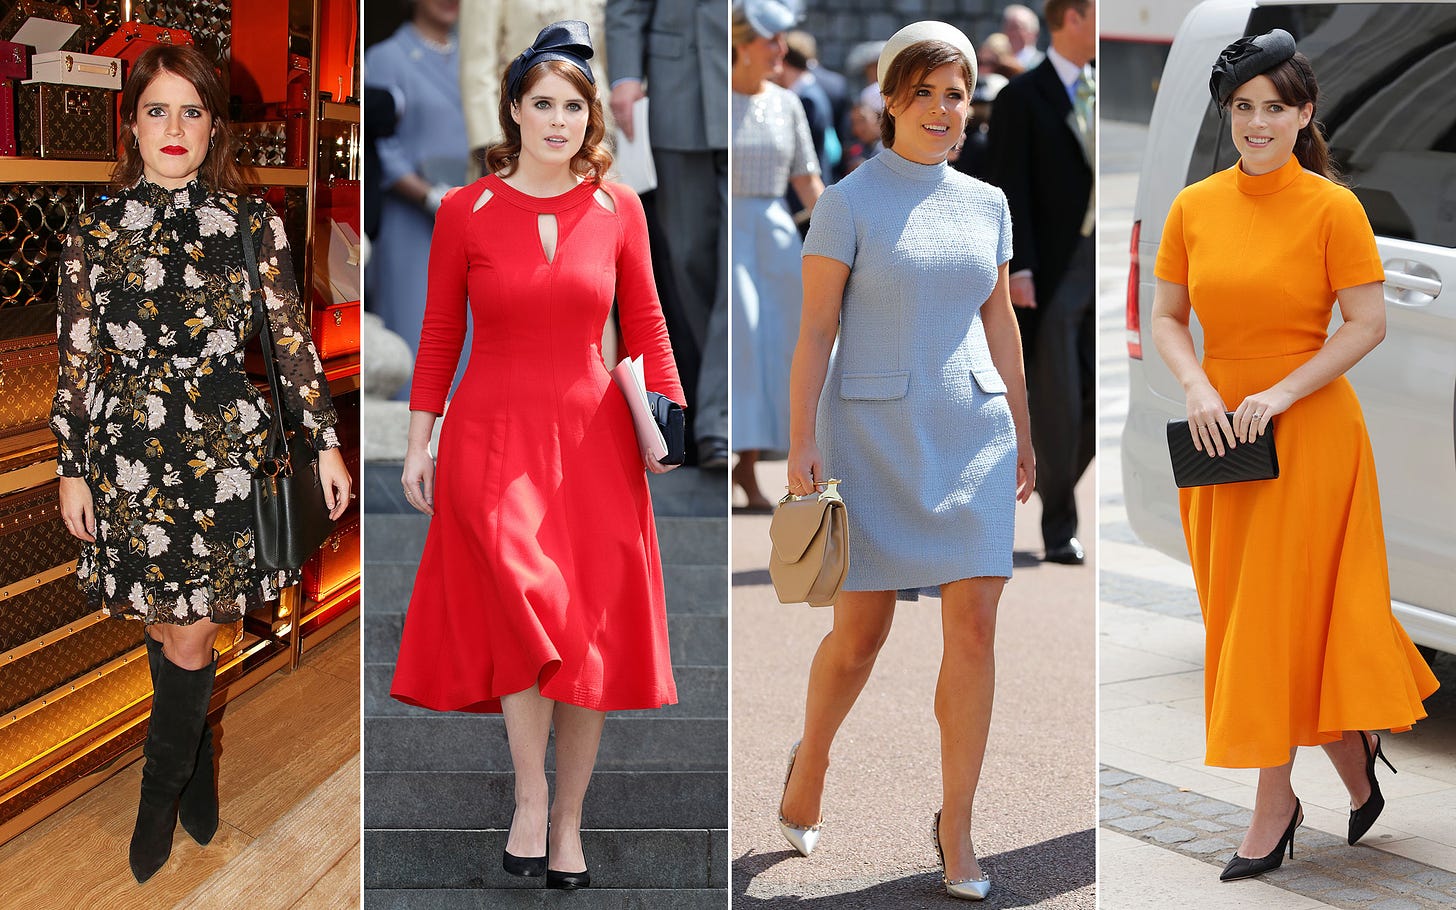 Princess Eugenie pictured in a floral dress, red dress, blue dress and orange dress